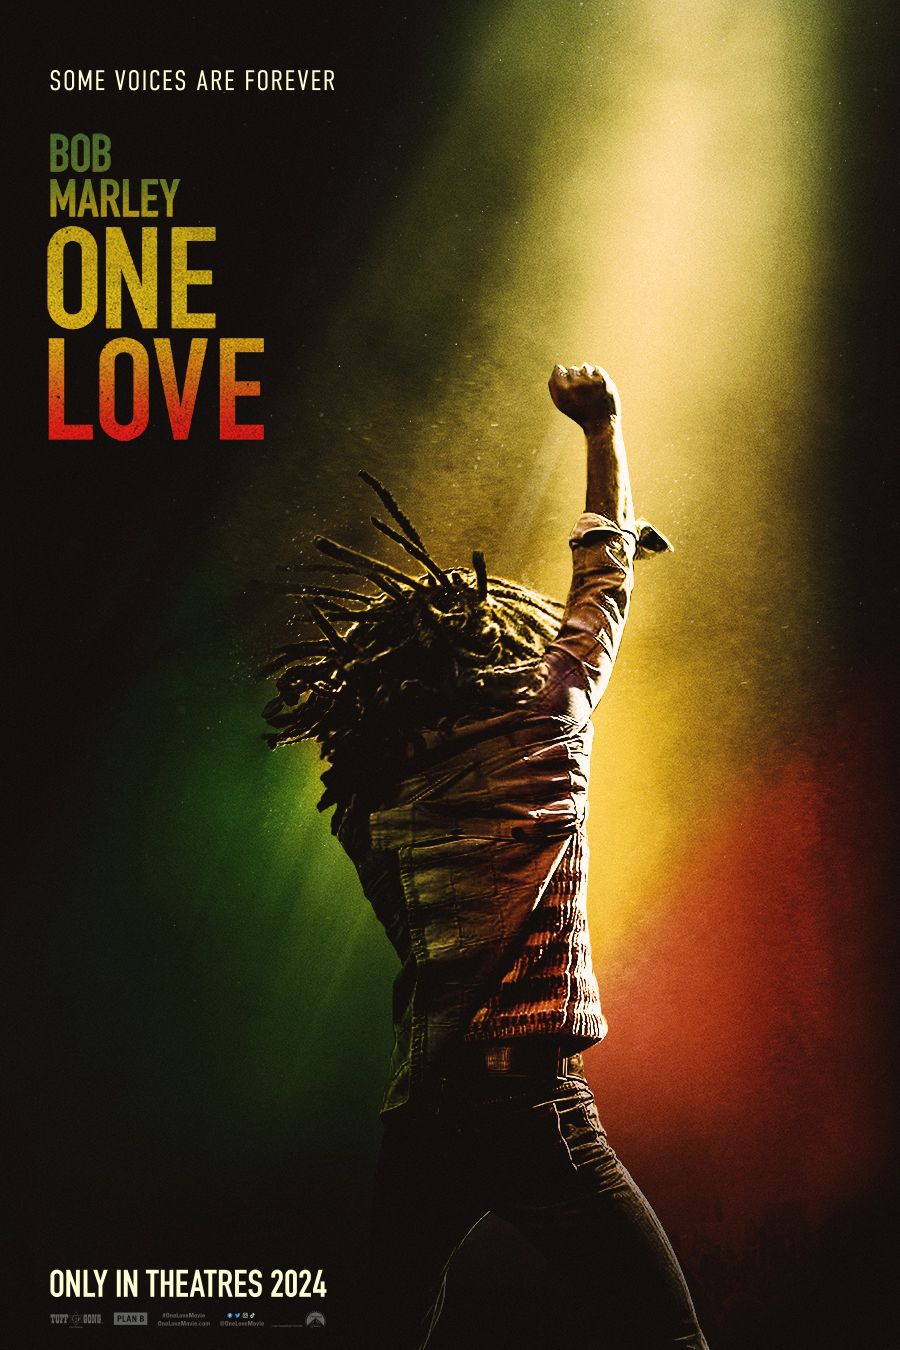 Bob Marley One Love Soundtrack Guide: Every Song & When They Play